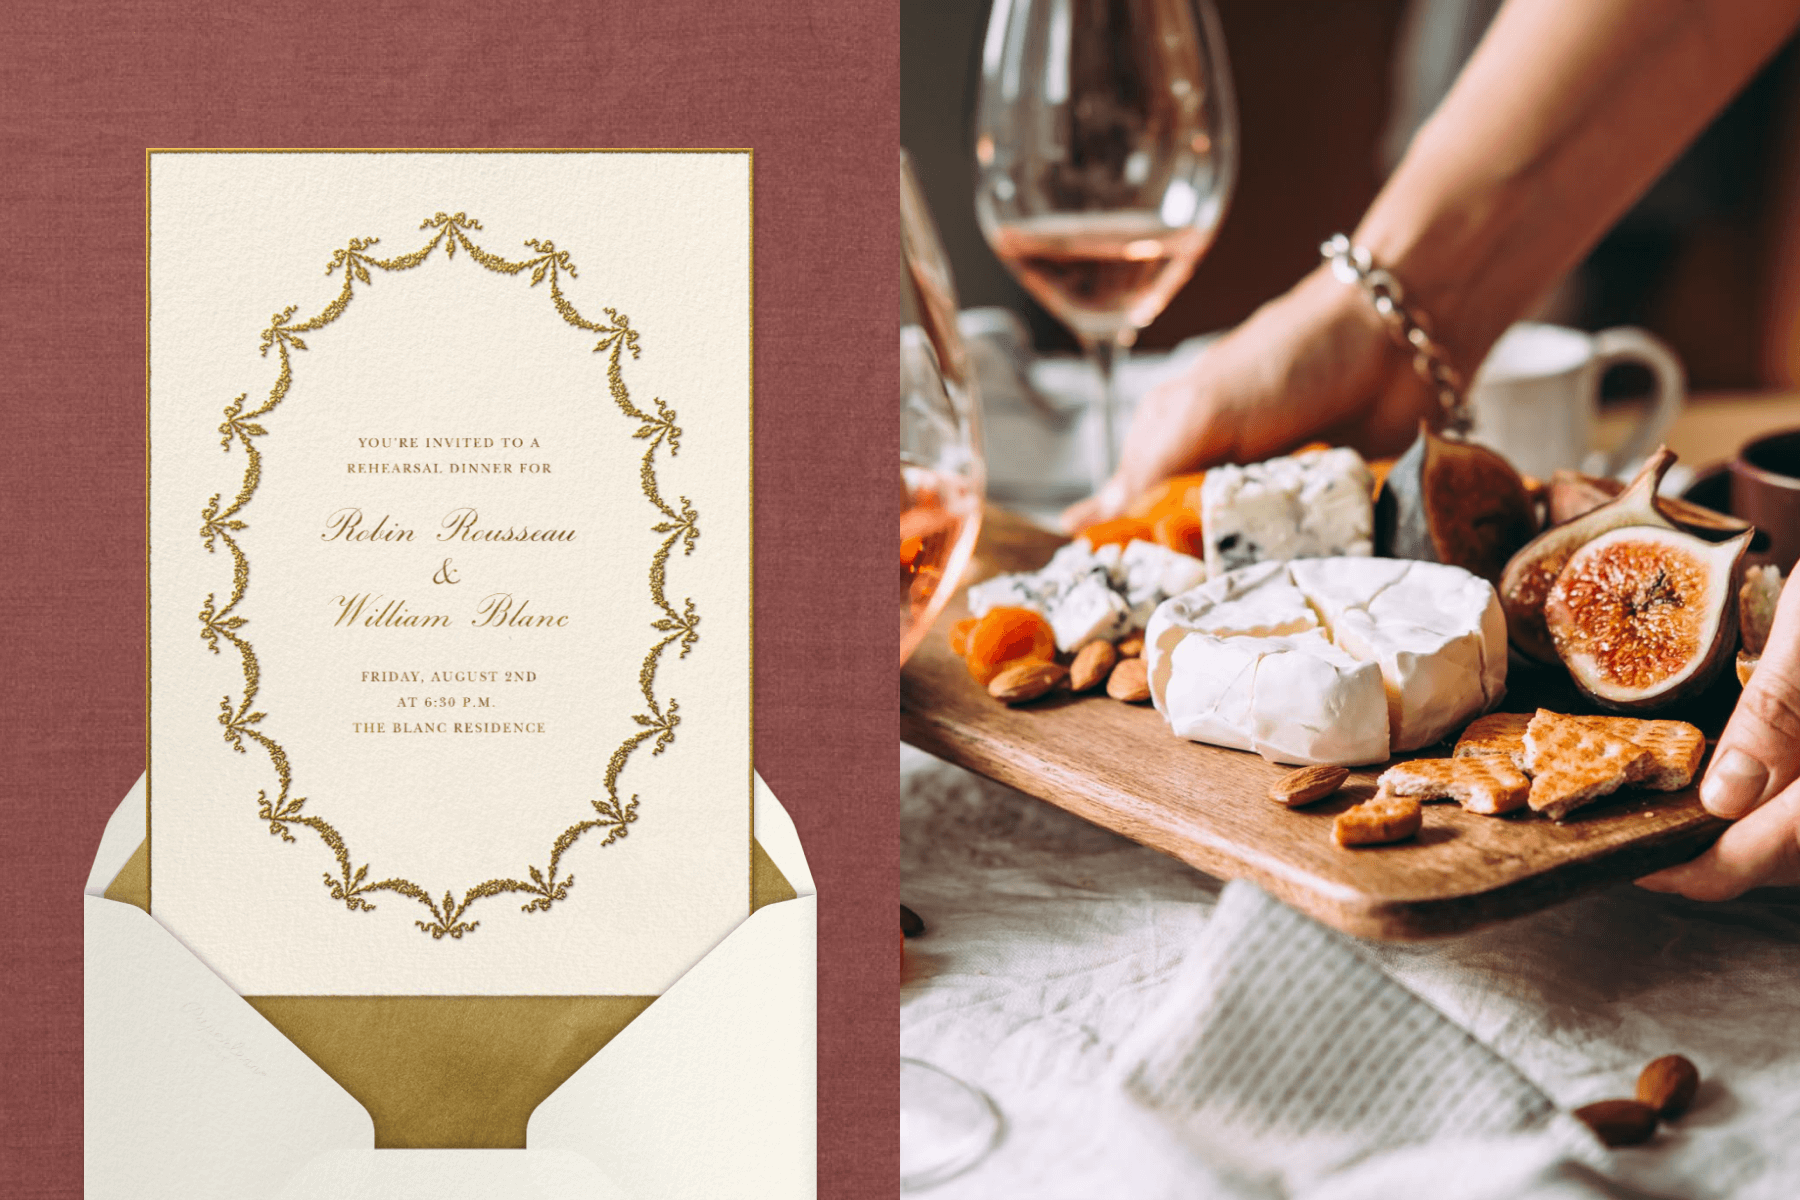 Left: A rehearsal dinner invitation with an oval frame made of decorative gold swags. Right: Two hands hold a cheese and fruit board just over a table with a wine glass in the background.